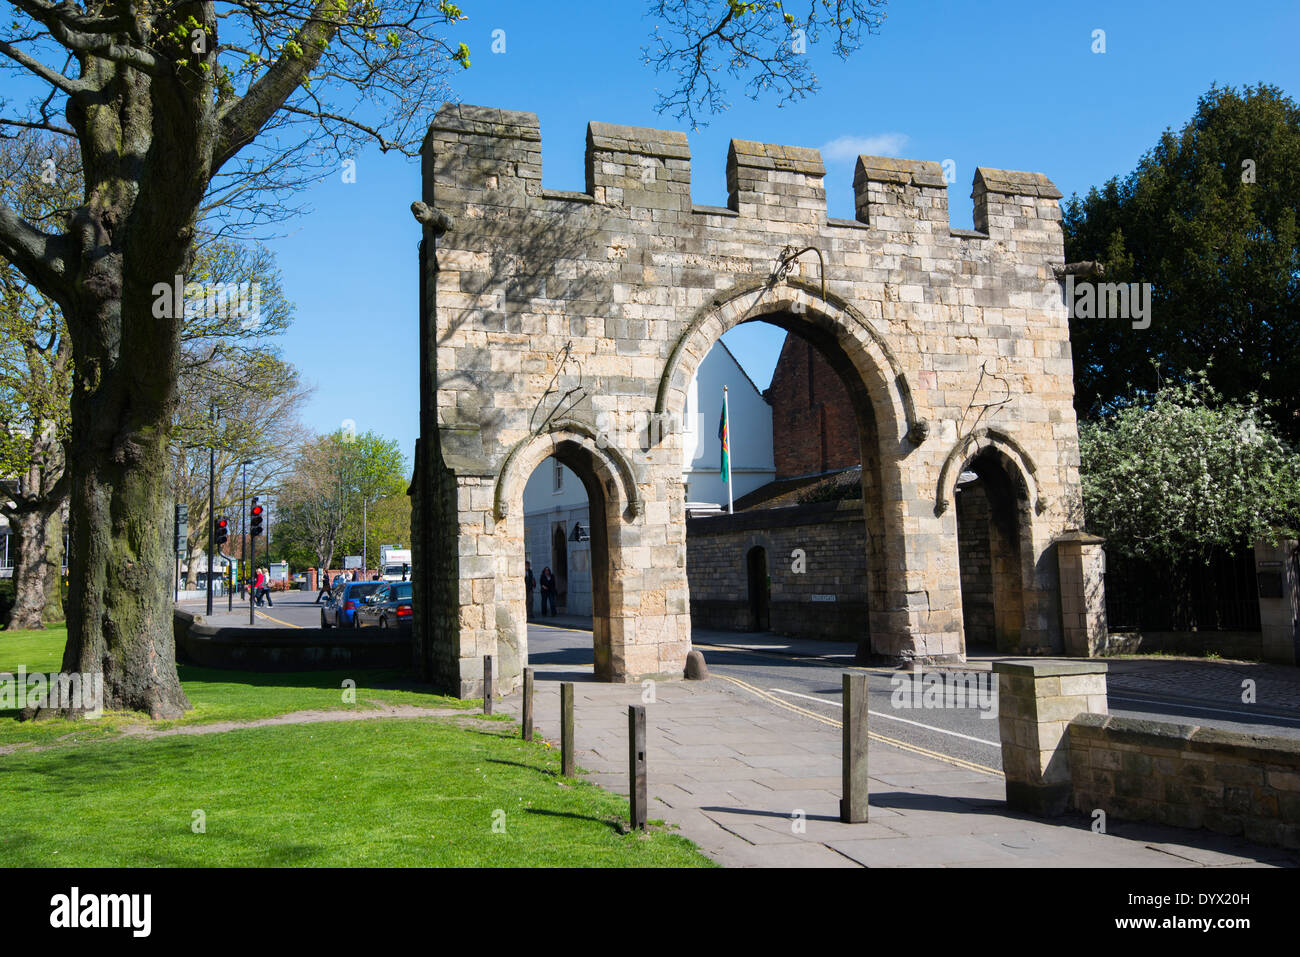 Priory Gate Arch in Lincoln City Centre, Lincolnshire England UK Stock Photo